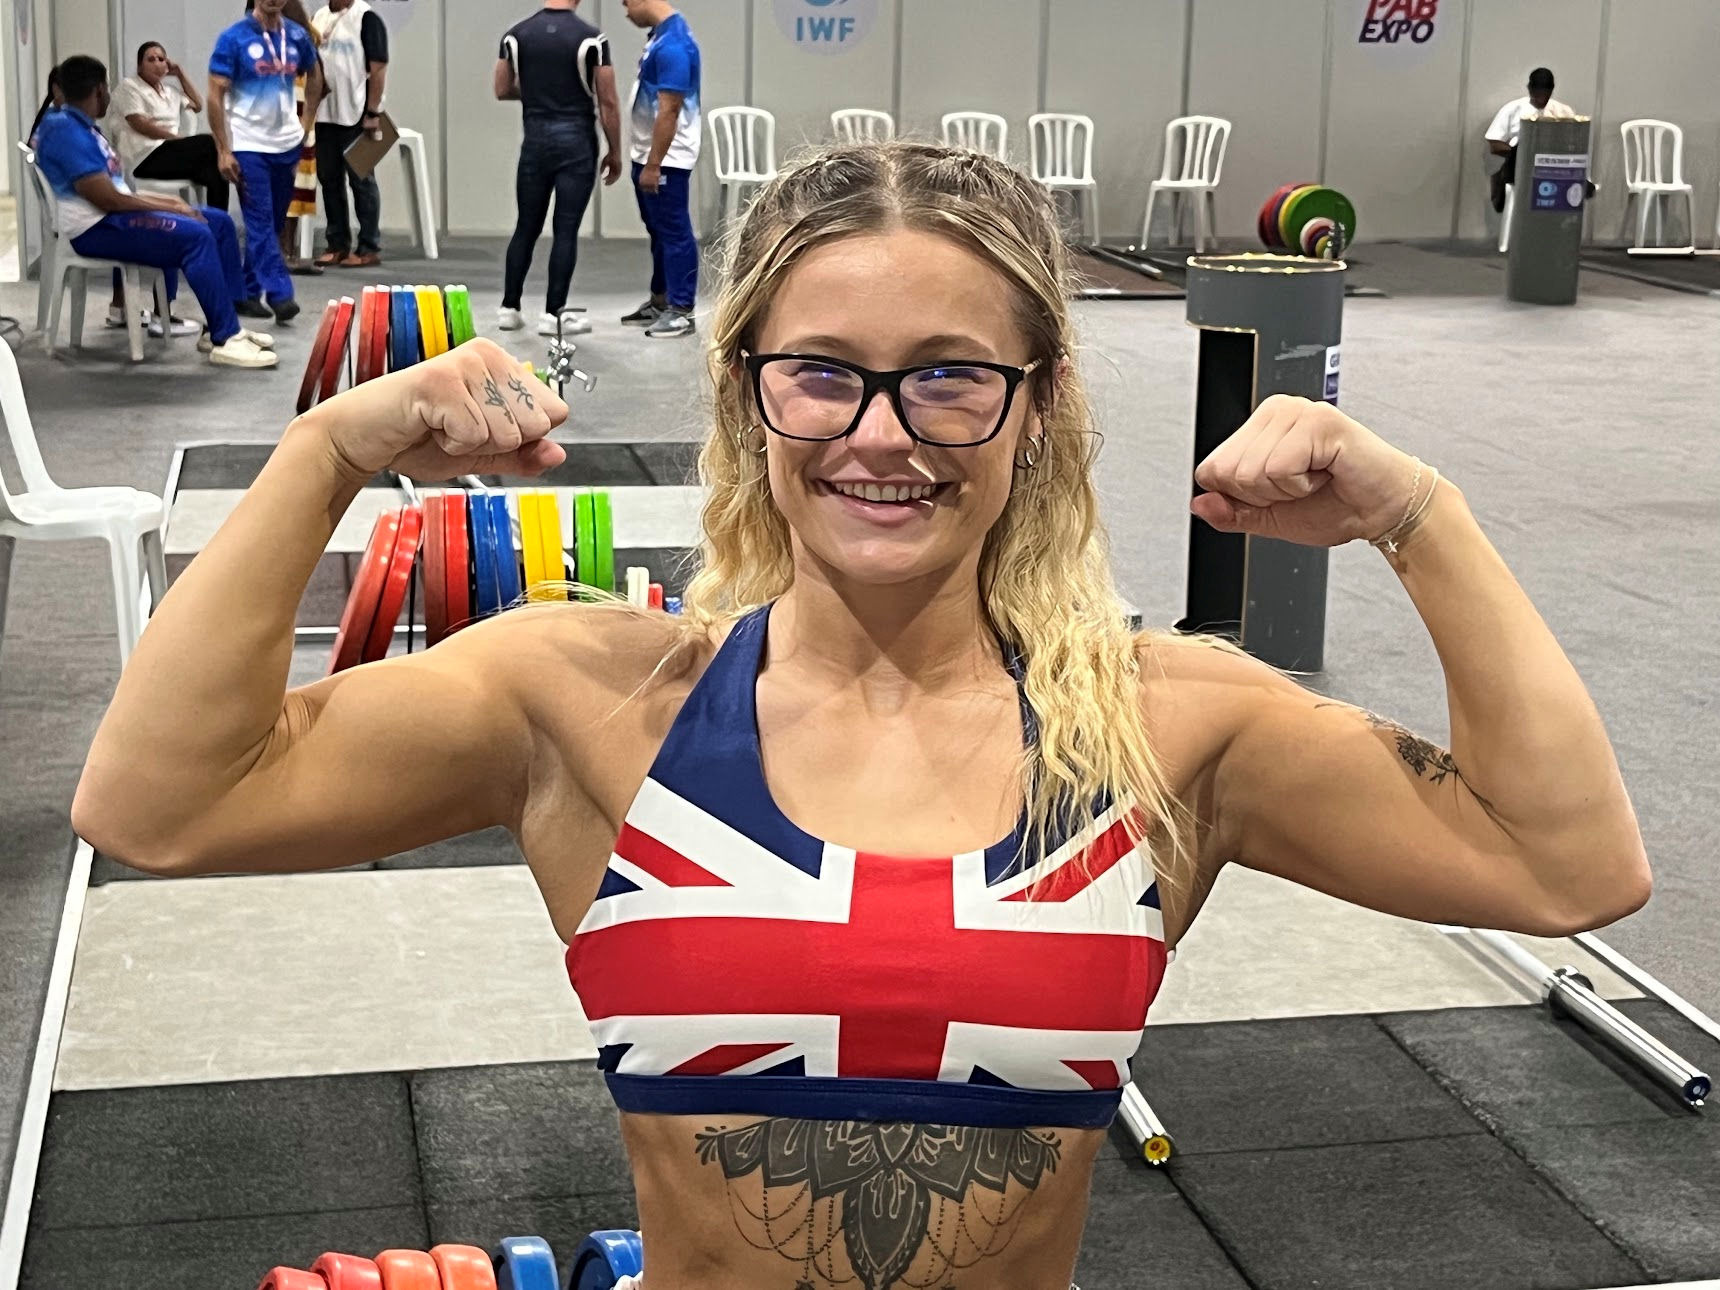 Despite an issue with her back, Britain's Fraer Morrow has insisted she is 